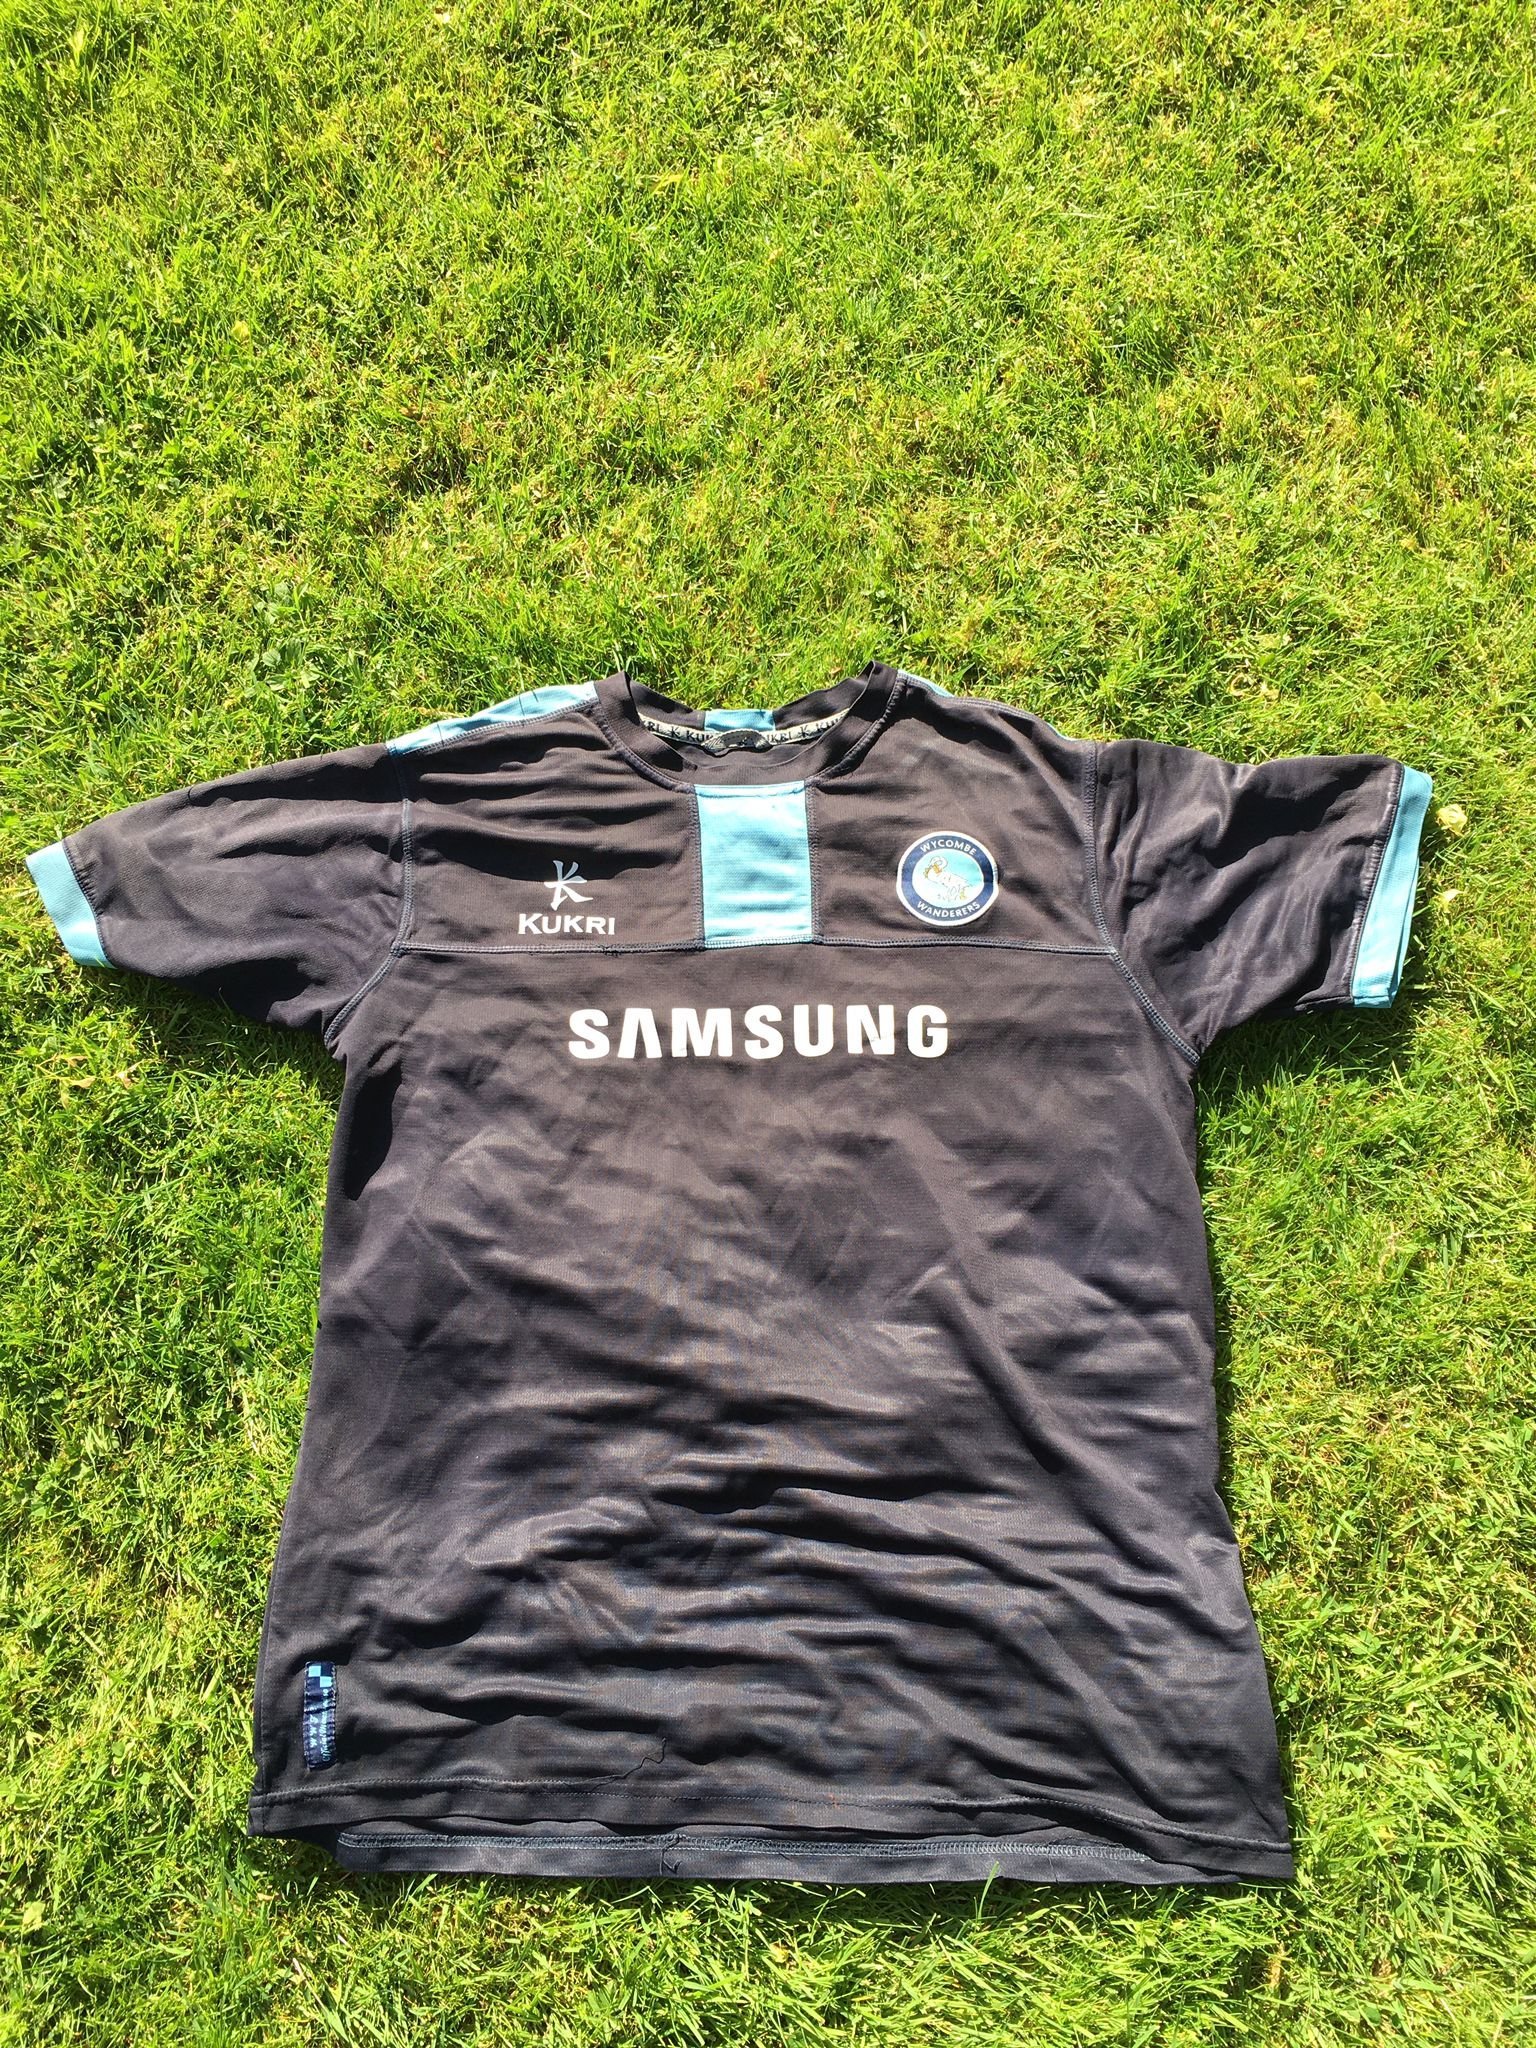 A training shirt from the 2013/14 season